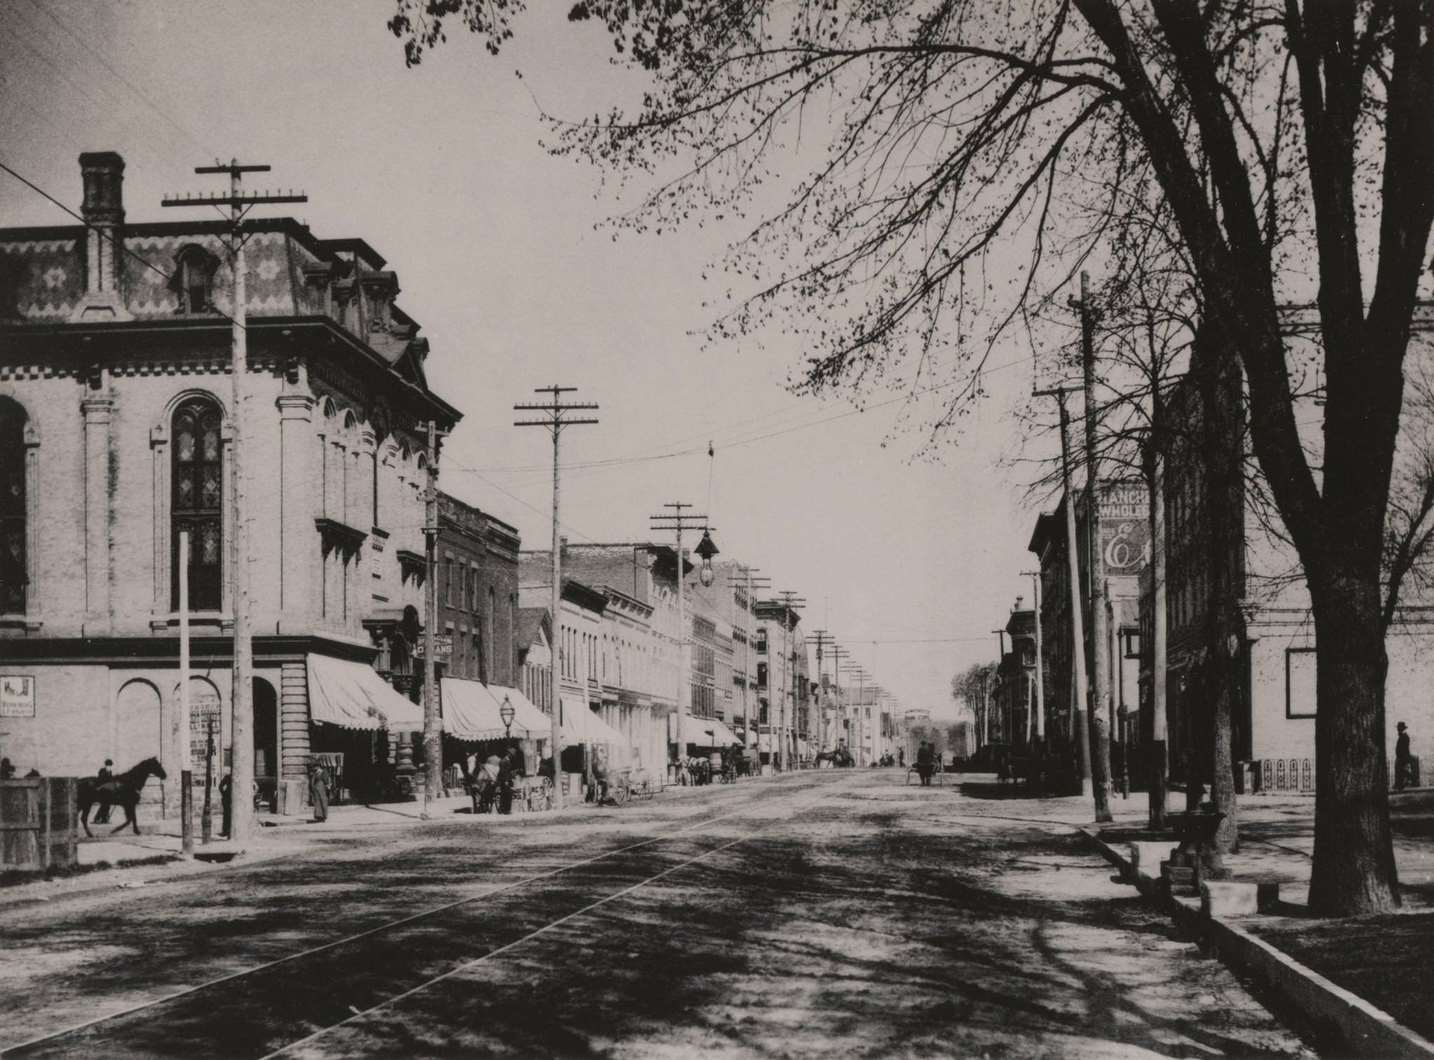 Looking northwest from the Methodist Episcopal Church, Main Street, with trolley track running down the center of the street, Janesville, Wisconsin, 1893.